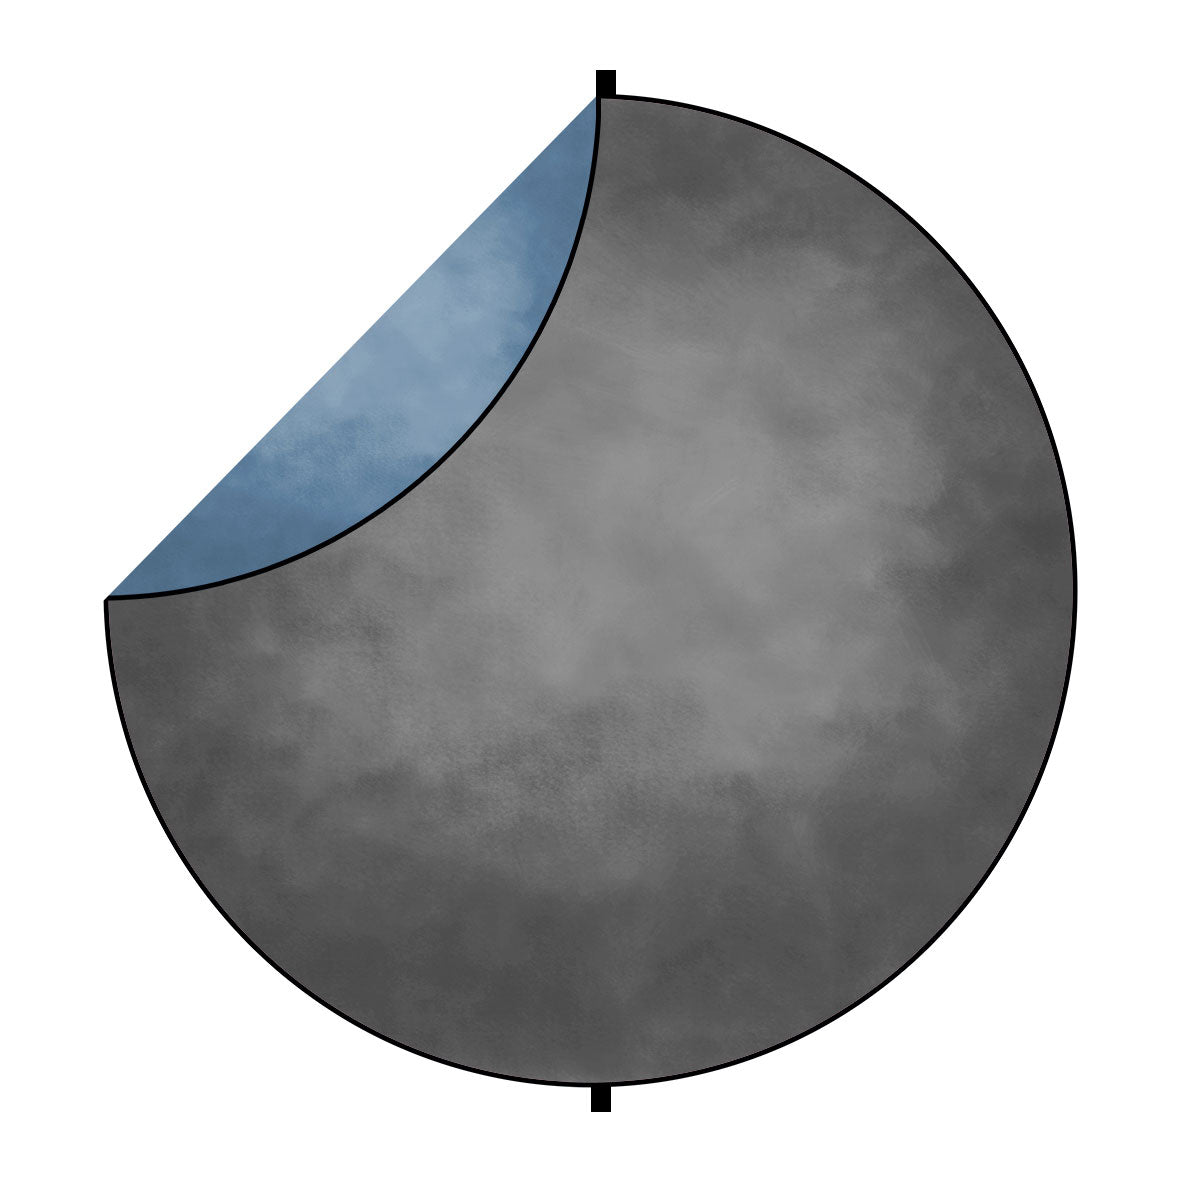 Fox Abstract Gray/Blue Collapsible Photography Backdrop 5x5ft(1.5x1.5m) - Foxbackdrop